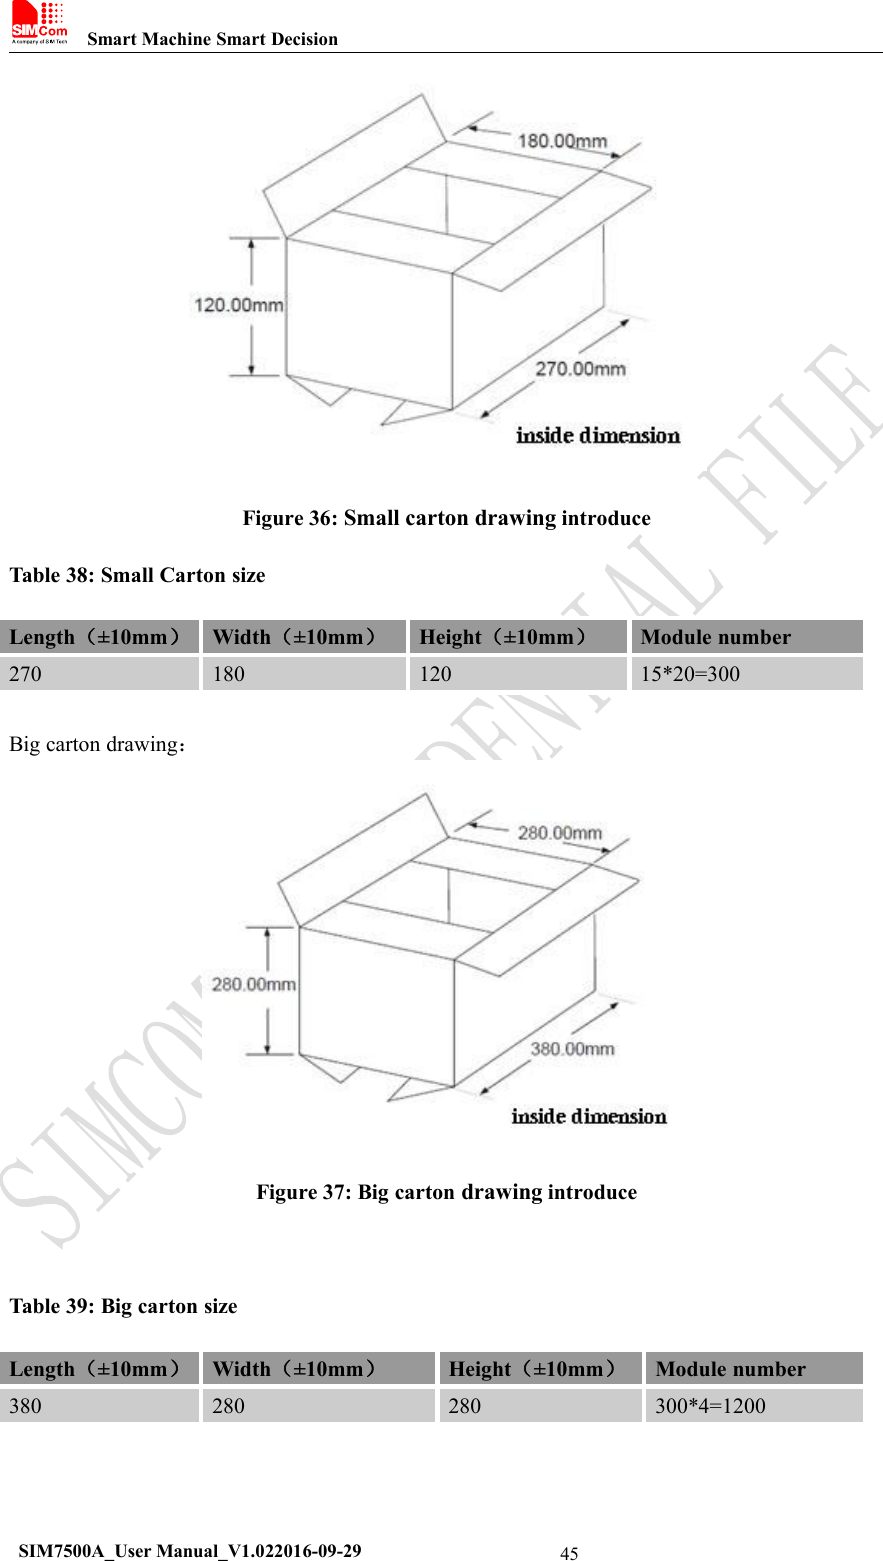 Smart Machine Smart DecisionSIM7500A_User Manual_V1.022016-09-2945Figure 36: Small carton drawing introduceTable 38: Small Carton sizeLength（±10mm）Width（±10mm）Height（±10mm）Module number27018012015*20=300Big carton drawing：Figure 37: Big carton drawing introduceTable 39: Big carton sizeLength（±10mm）Width（±10mm）Height（±10mm）Module number380280280300*4=1200